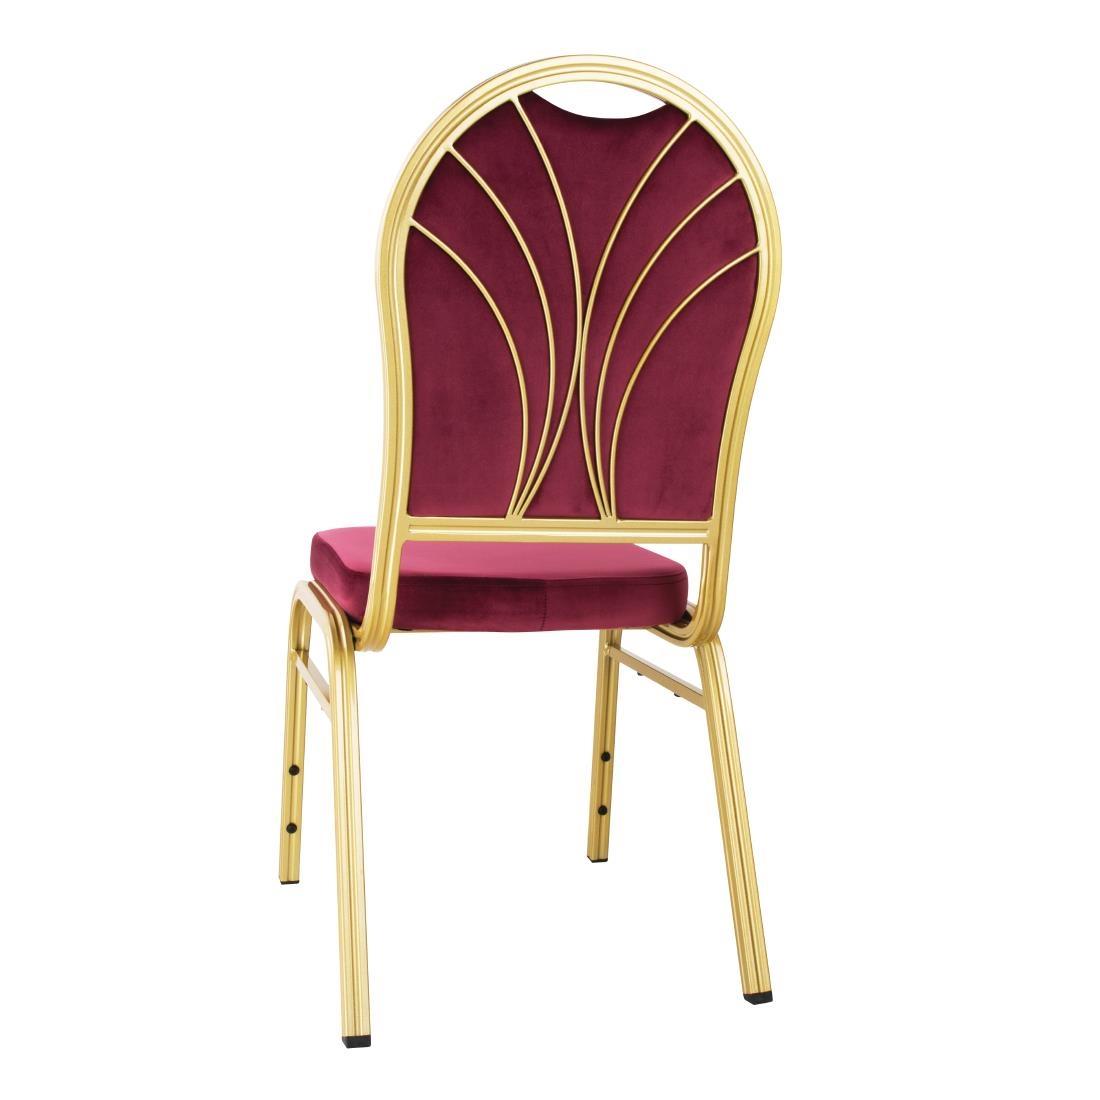 Bolero Regal Banquet Chairs Claret (Pack of 4) - DY695  - 3